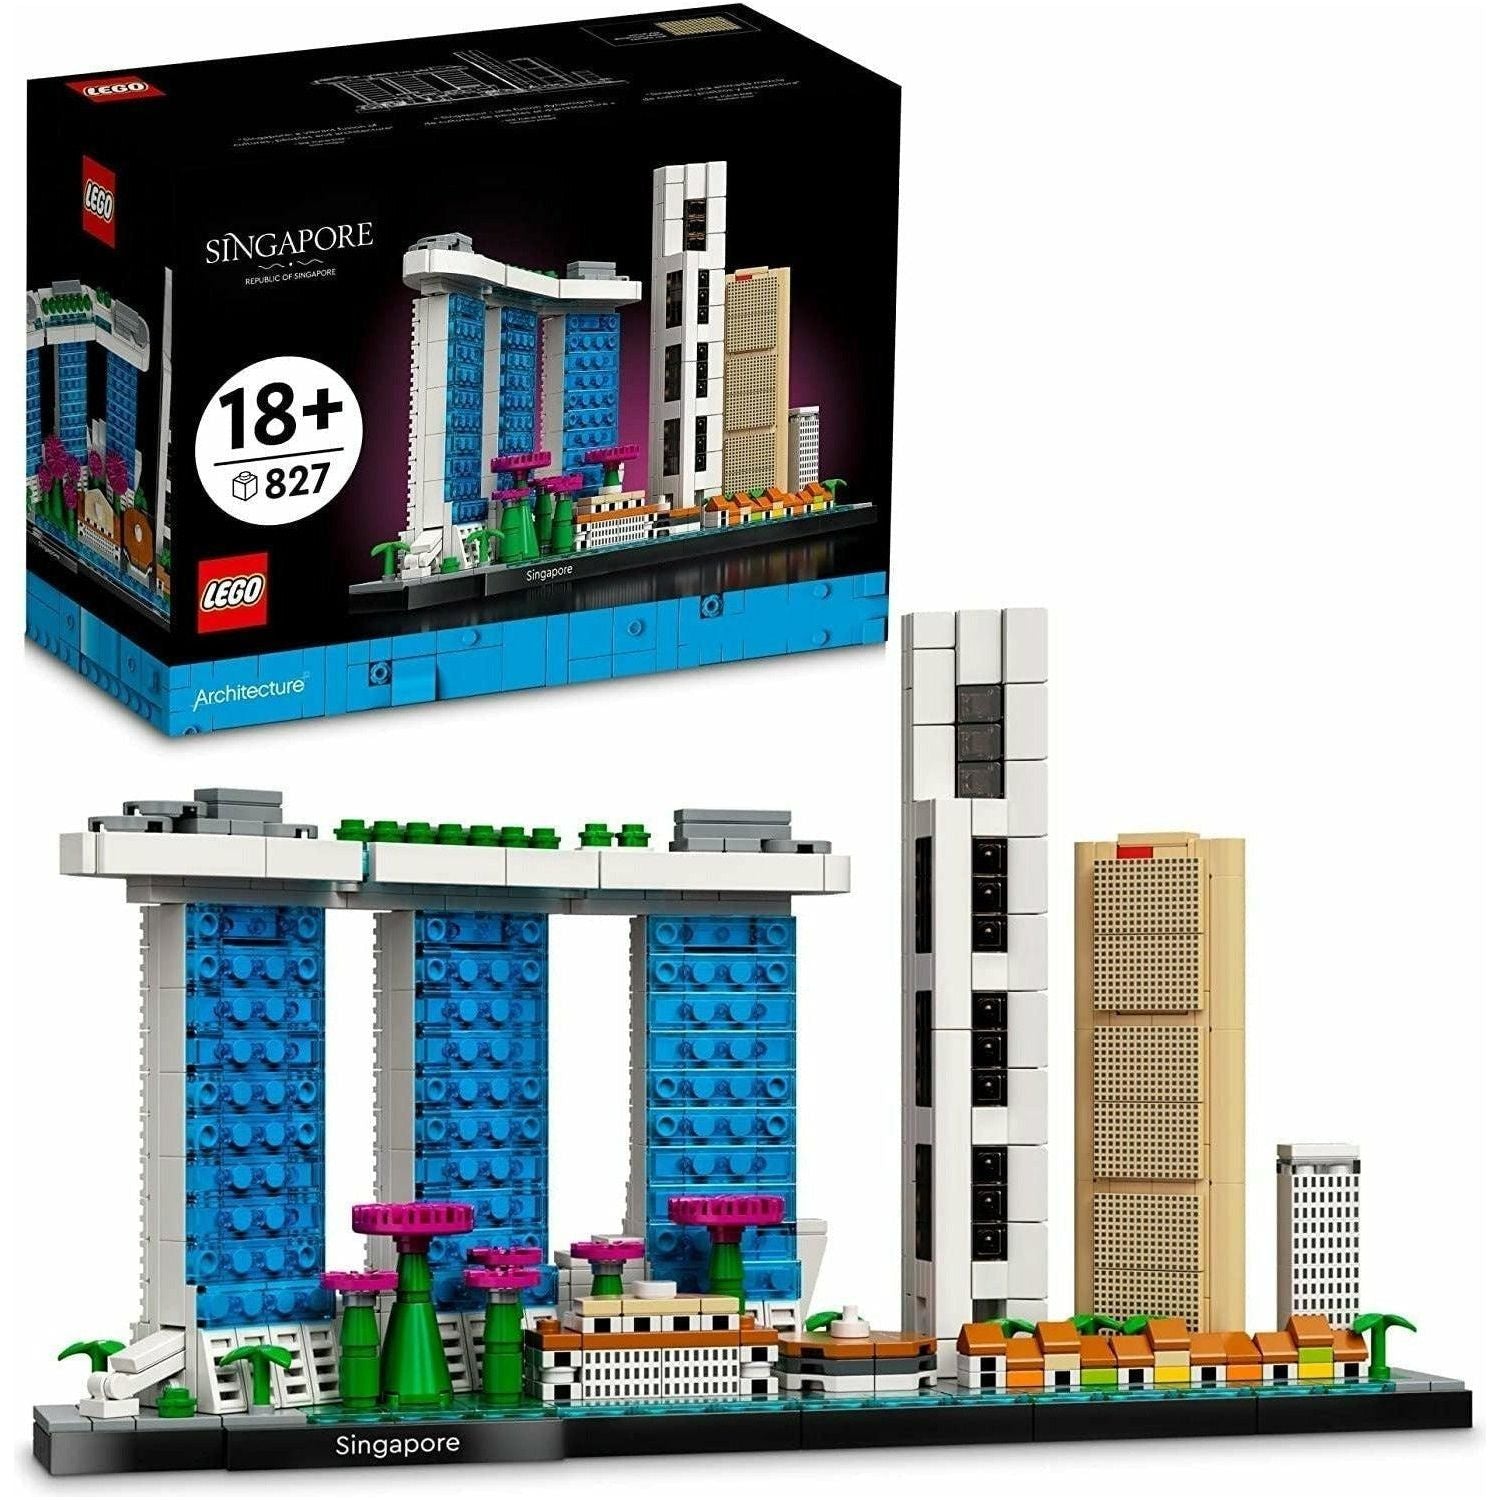 LEGO 21057 Architecture Skyline Collection Singapore Building Kit Collectible Display 827 Pieces - BumbleToys - 18+, Architecture, Boys, Girls, LEGO, OXE, Pre-Order